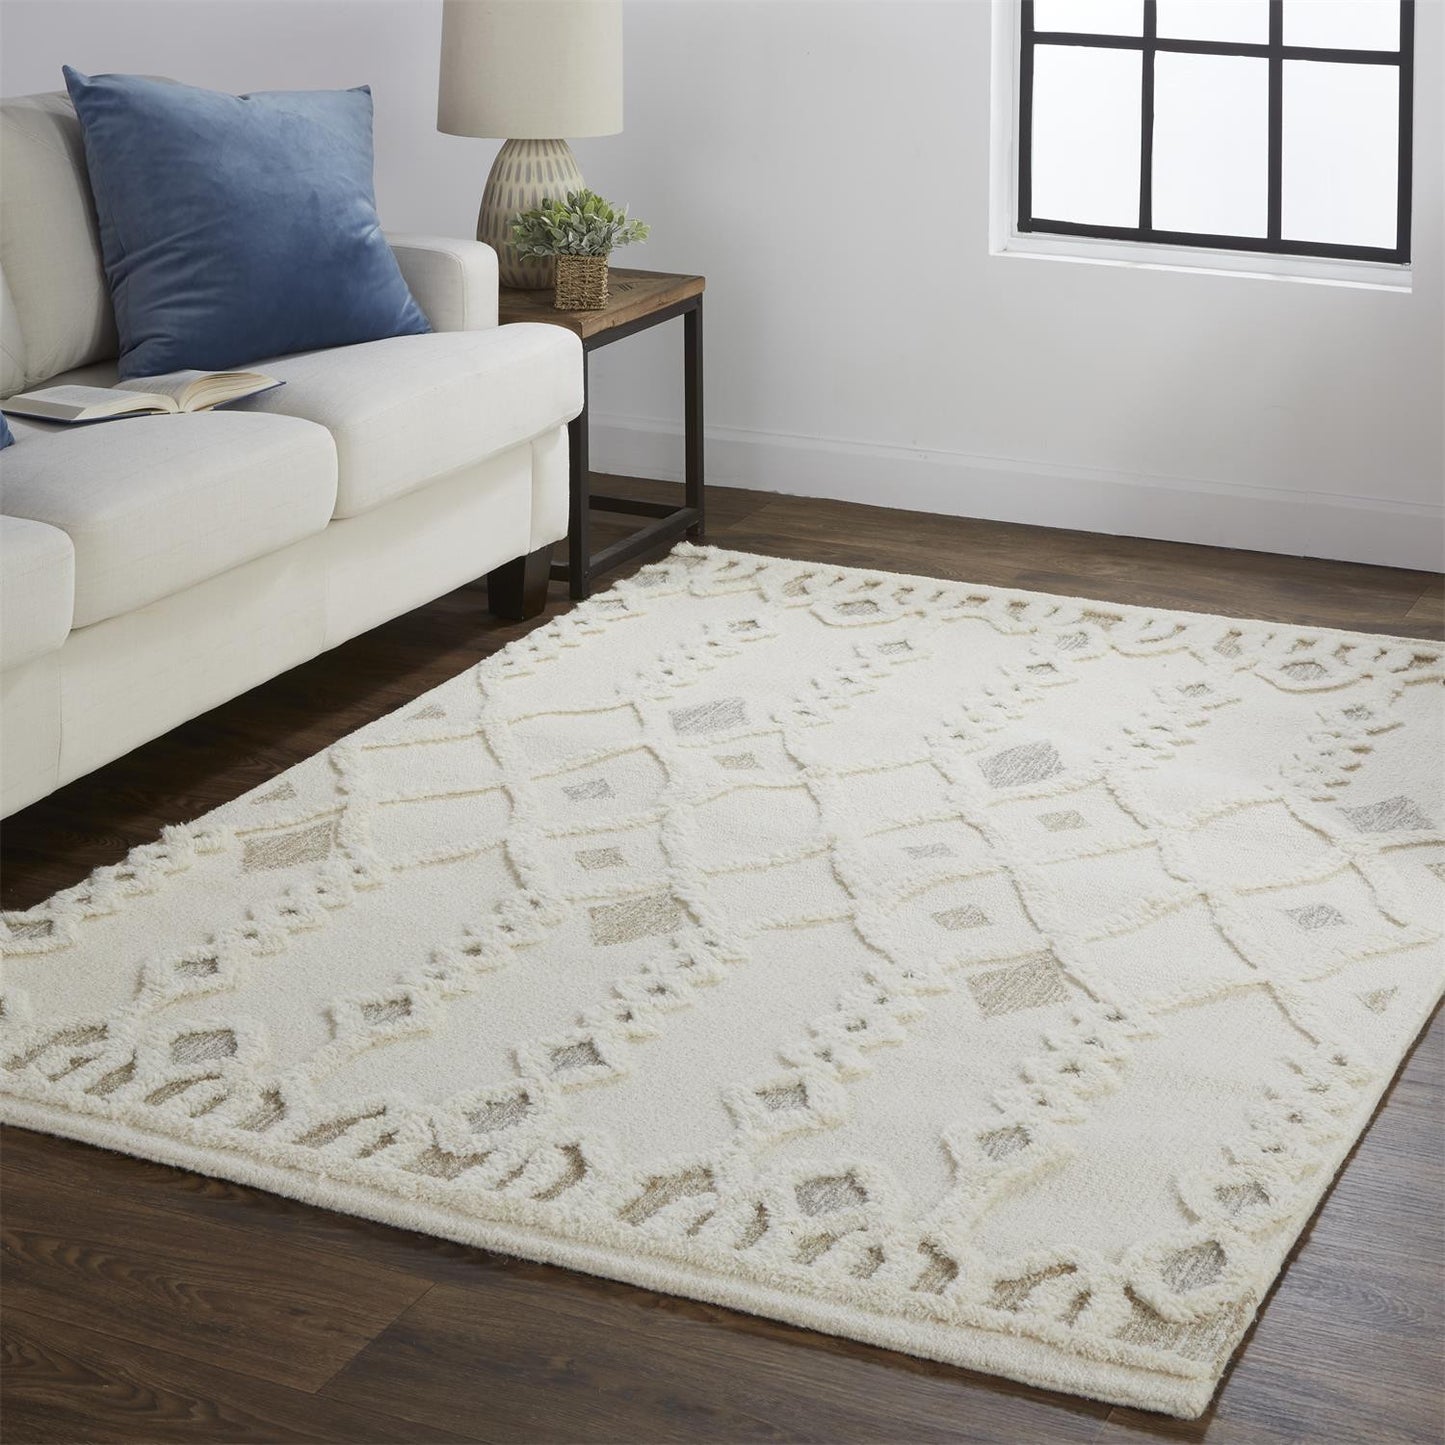 8' X 10' Ivory Tan And Silver Wool Geometric Tufted Handmade Stain Resistant Area Rug